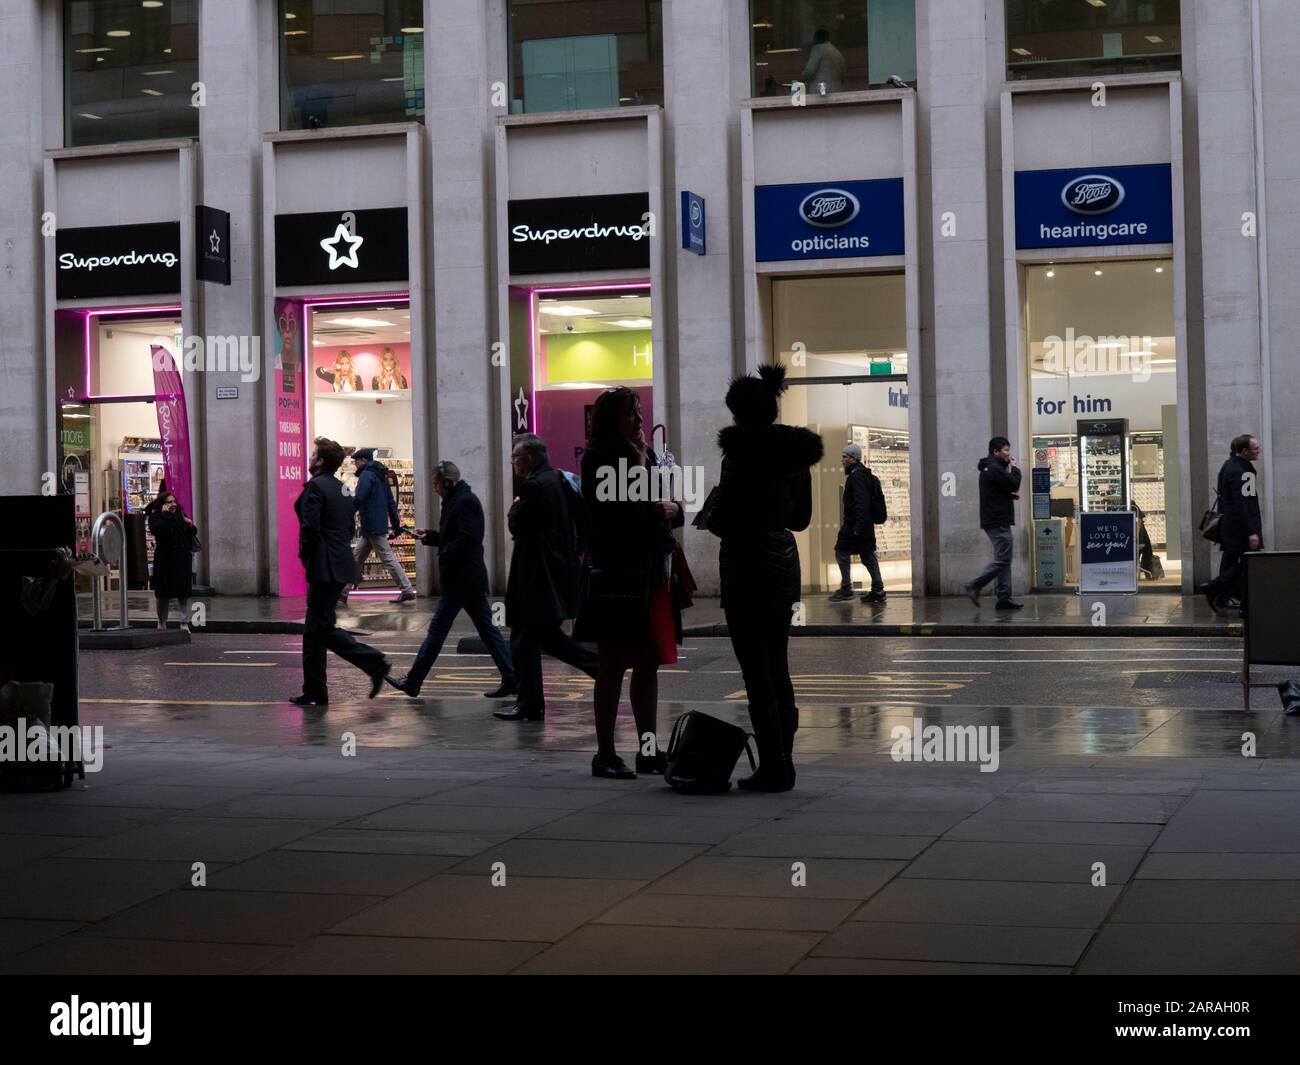 Superdrug and Boots rival high street chemist chains, compete for business in the City of London Uk Stock Photo